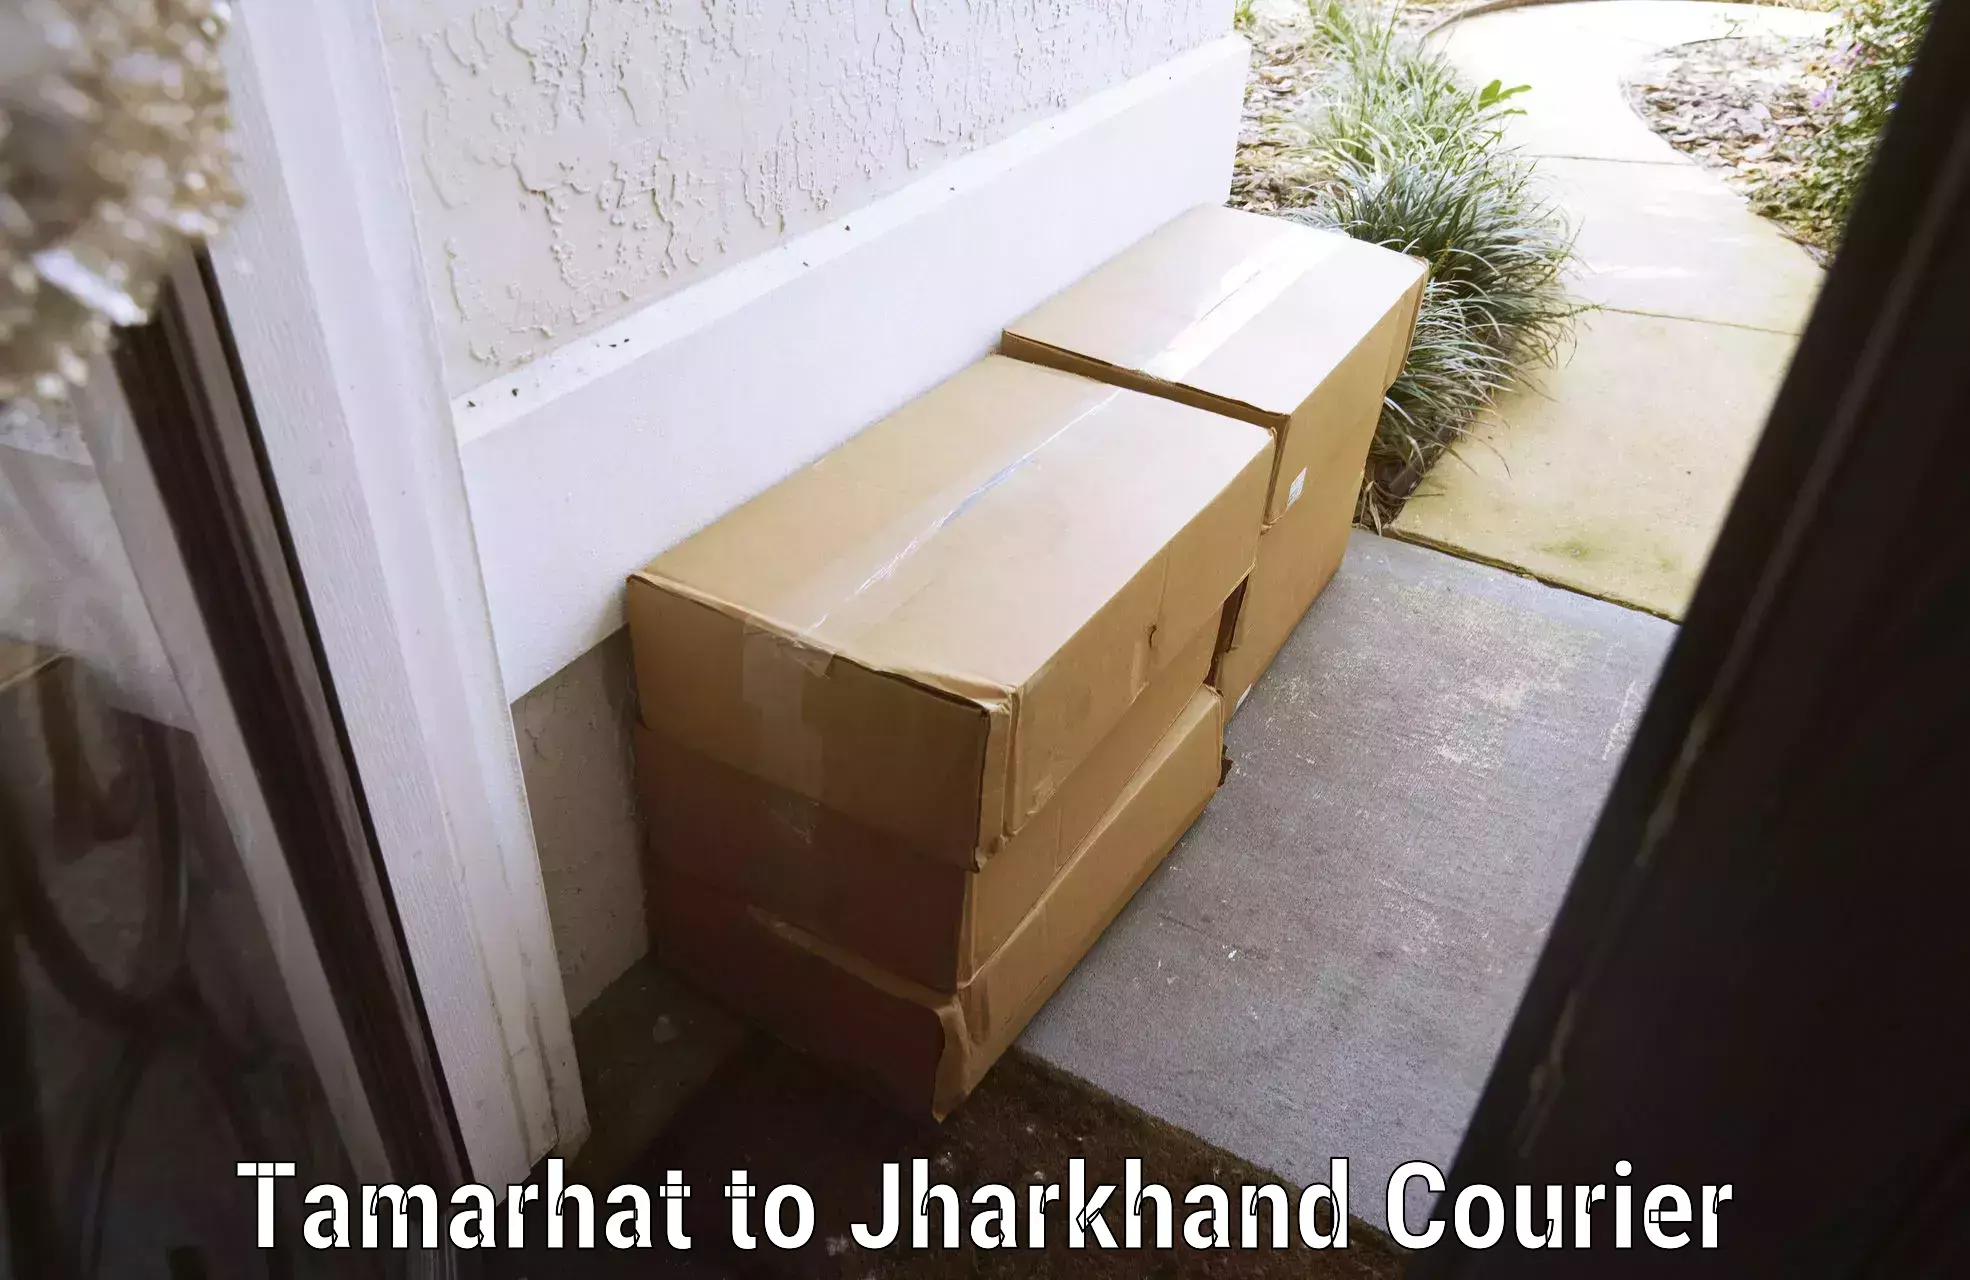 Instant baggage transport quote Tamarhat to Jharkhand